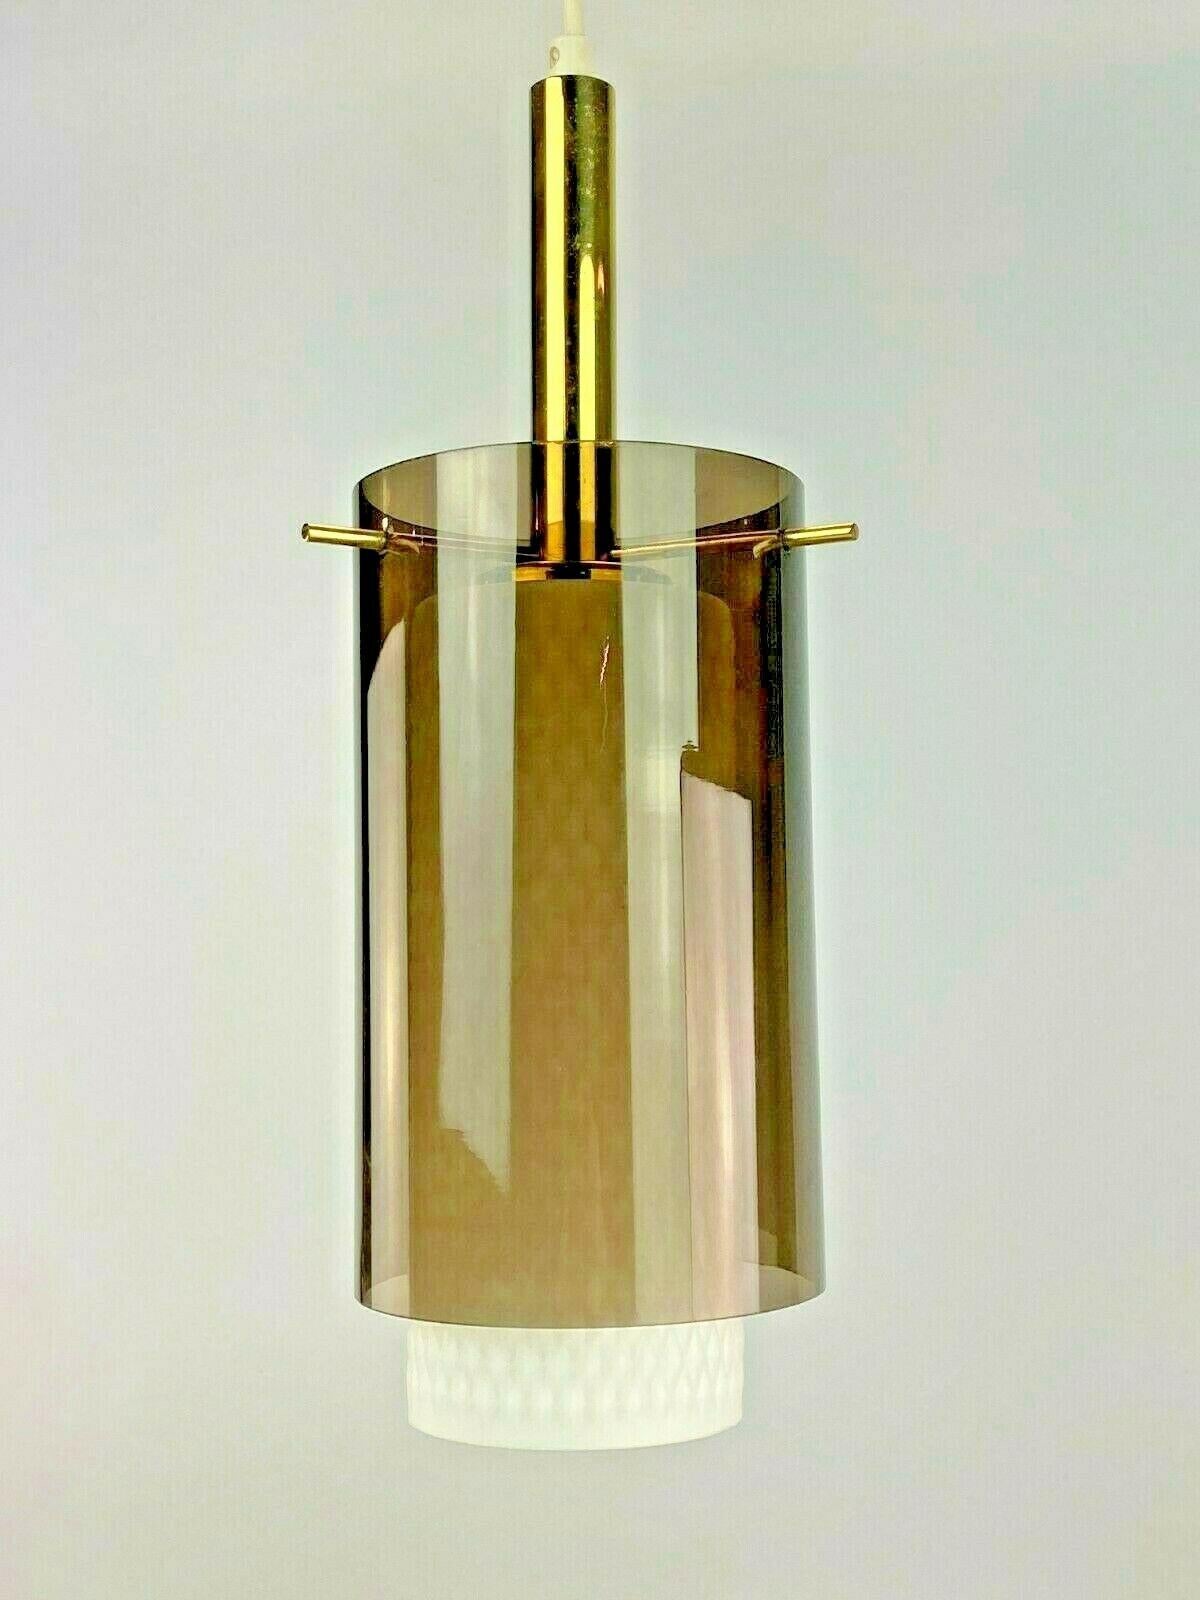 60s 70s lamp light ceiling lamp brass glass space age design 60s

Object: ceiling lamp

Manufacturer:

Condition: good

Age: around 1960-1970

Dimensions:

Diameter = 13cm
Height = 39cm

Other notes:

The pictures serve as part of